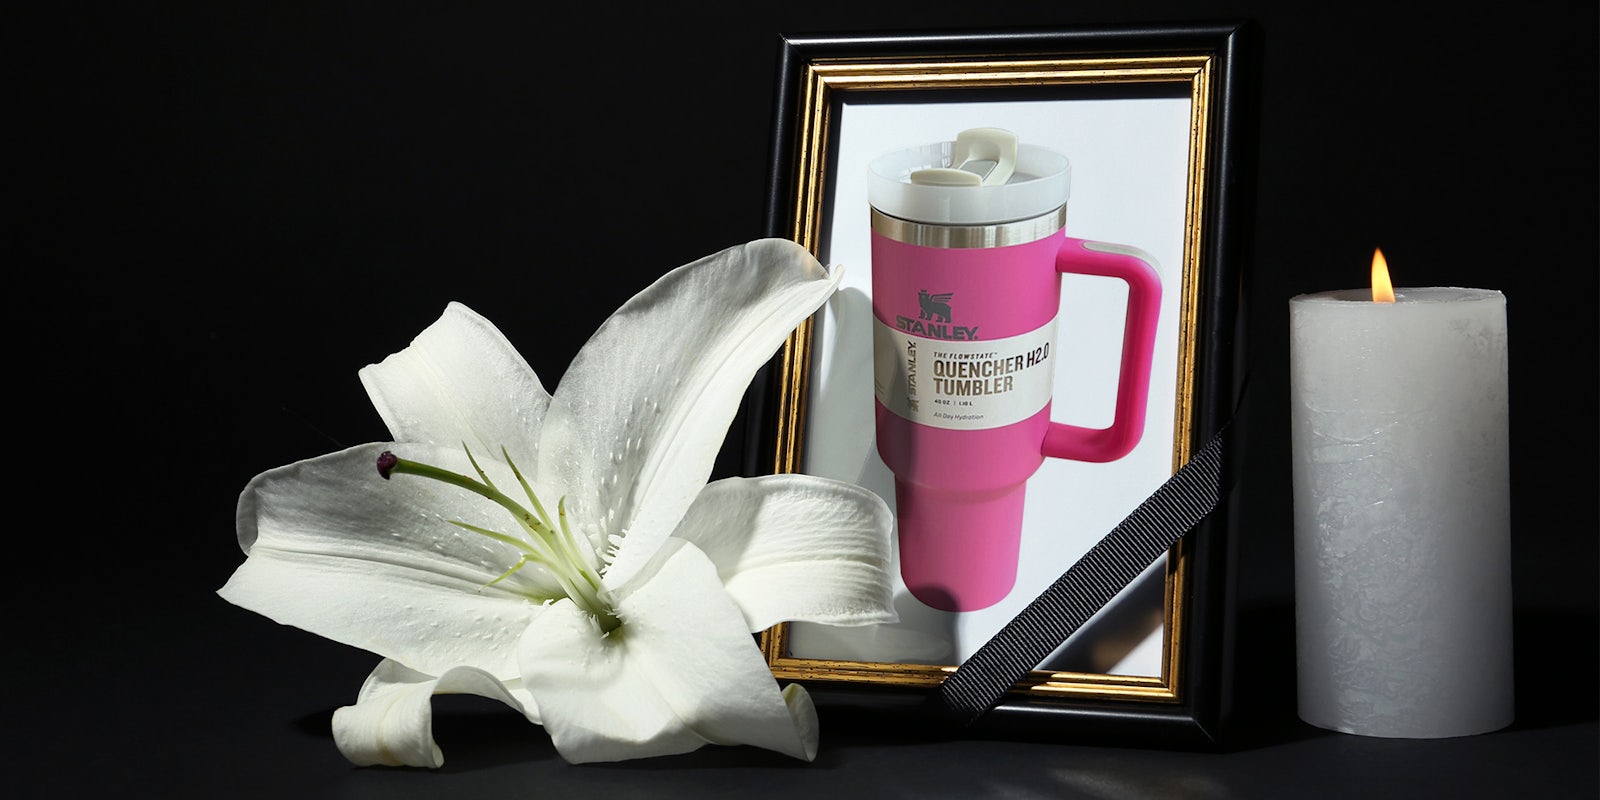 Starbucks Stanley cup in funeral photo frame with ribbon, white lily and candle on dark table against black background